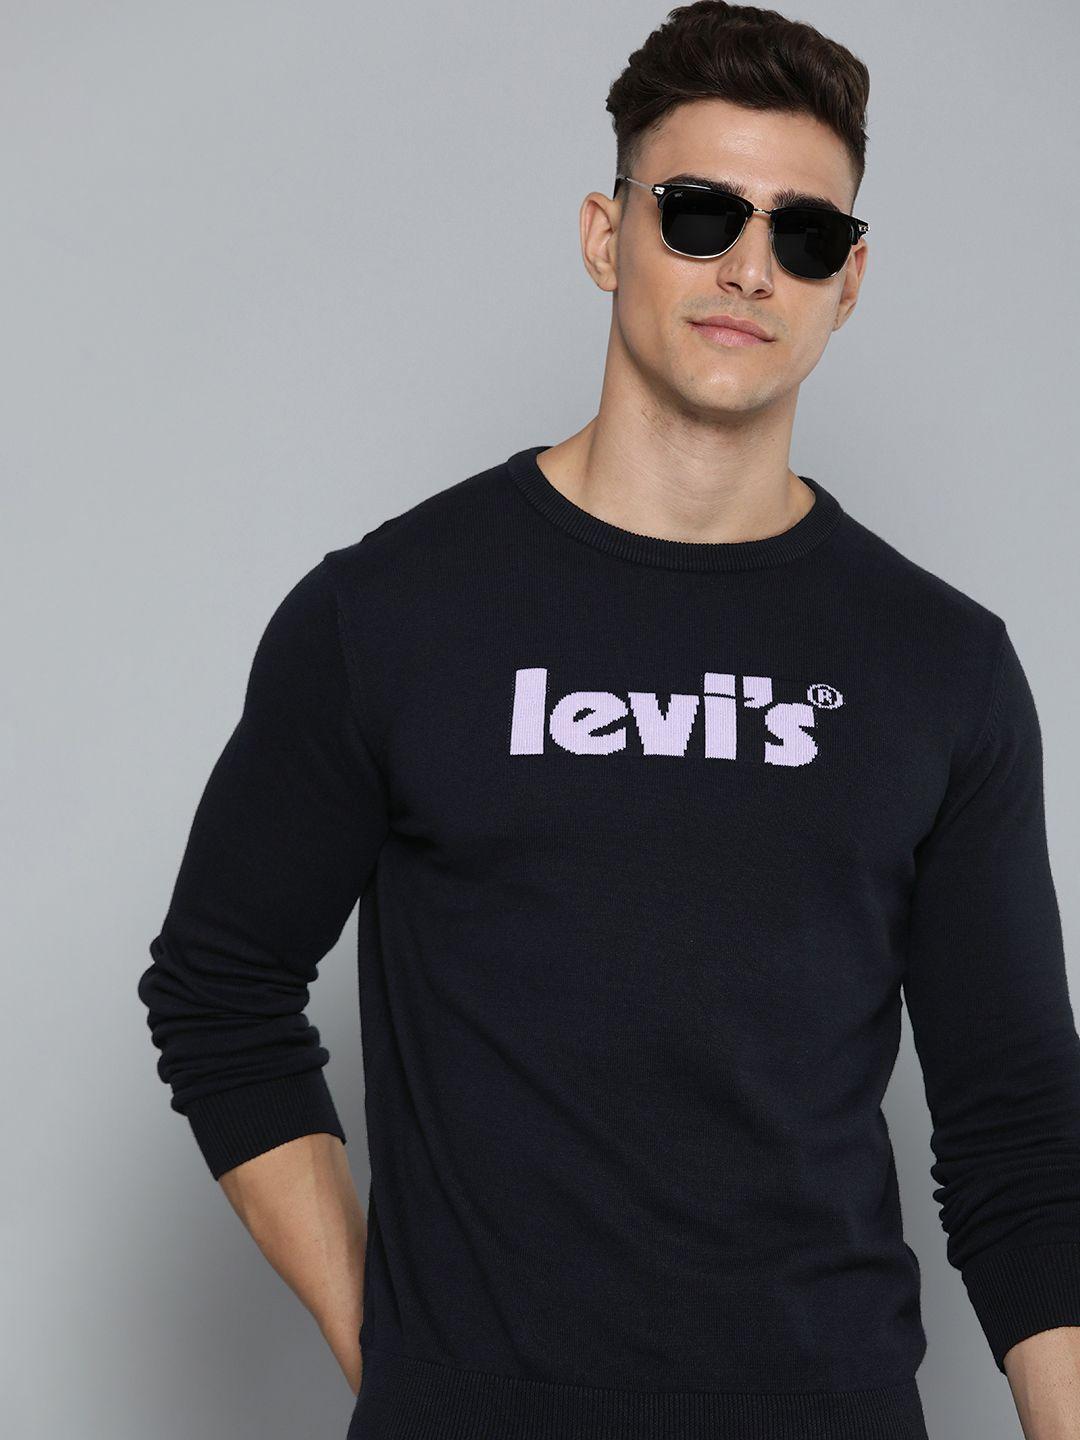 Levis Brand Logo Printed Pure Cotton Pullover Sweater